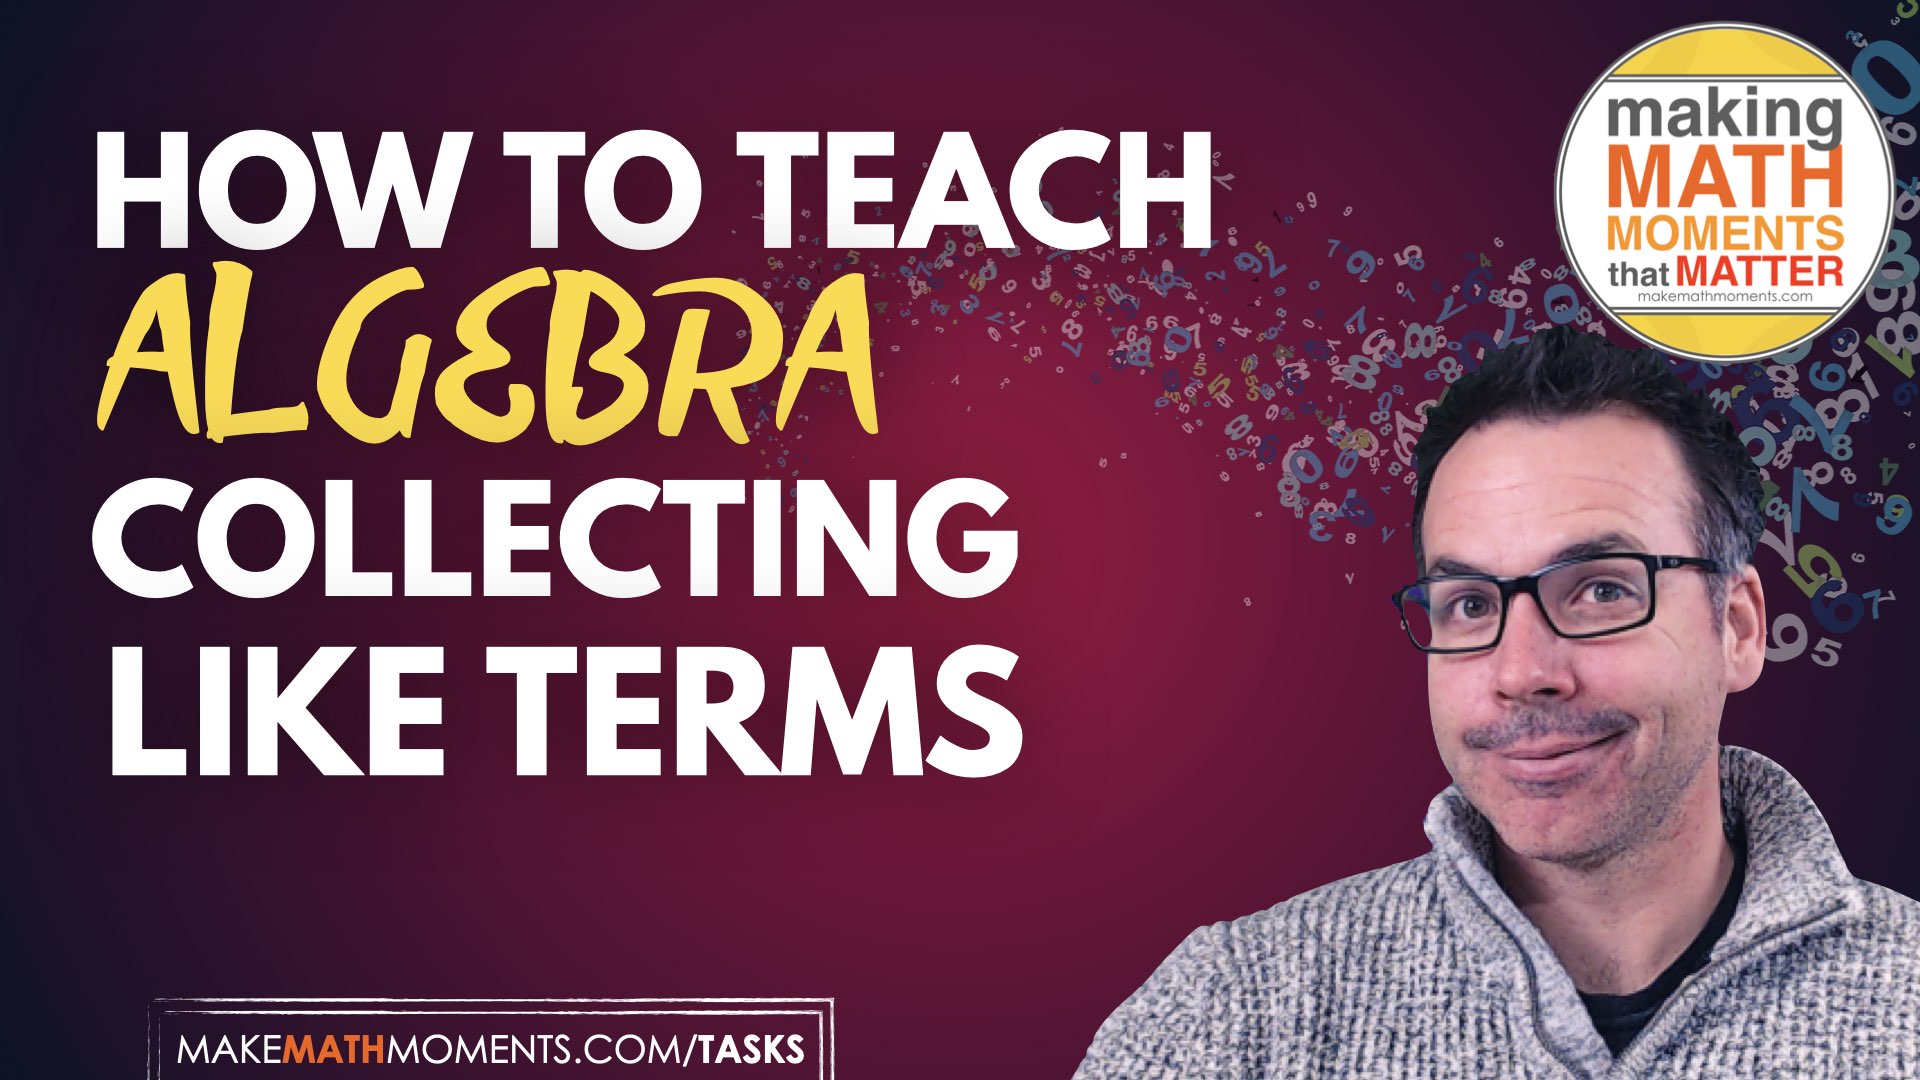 How To Teach Algebra: Collecting Like Terms